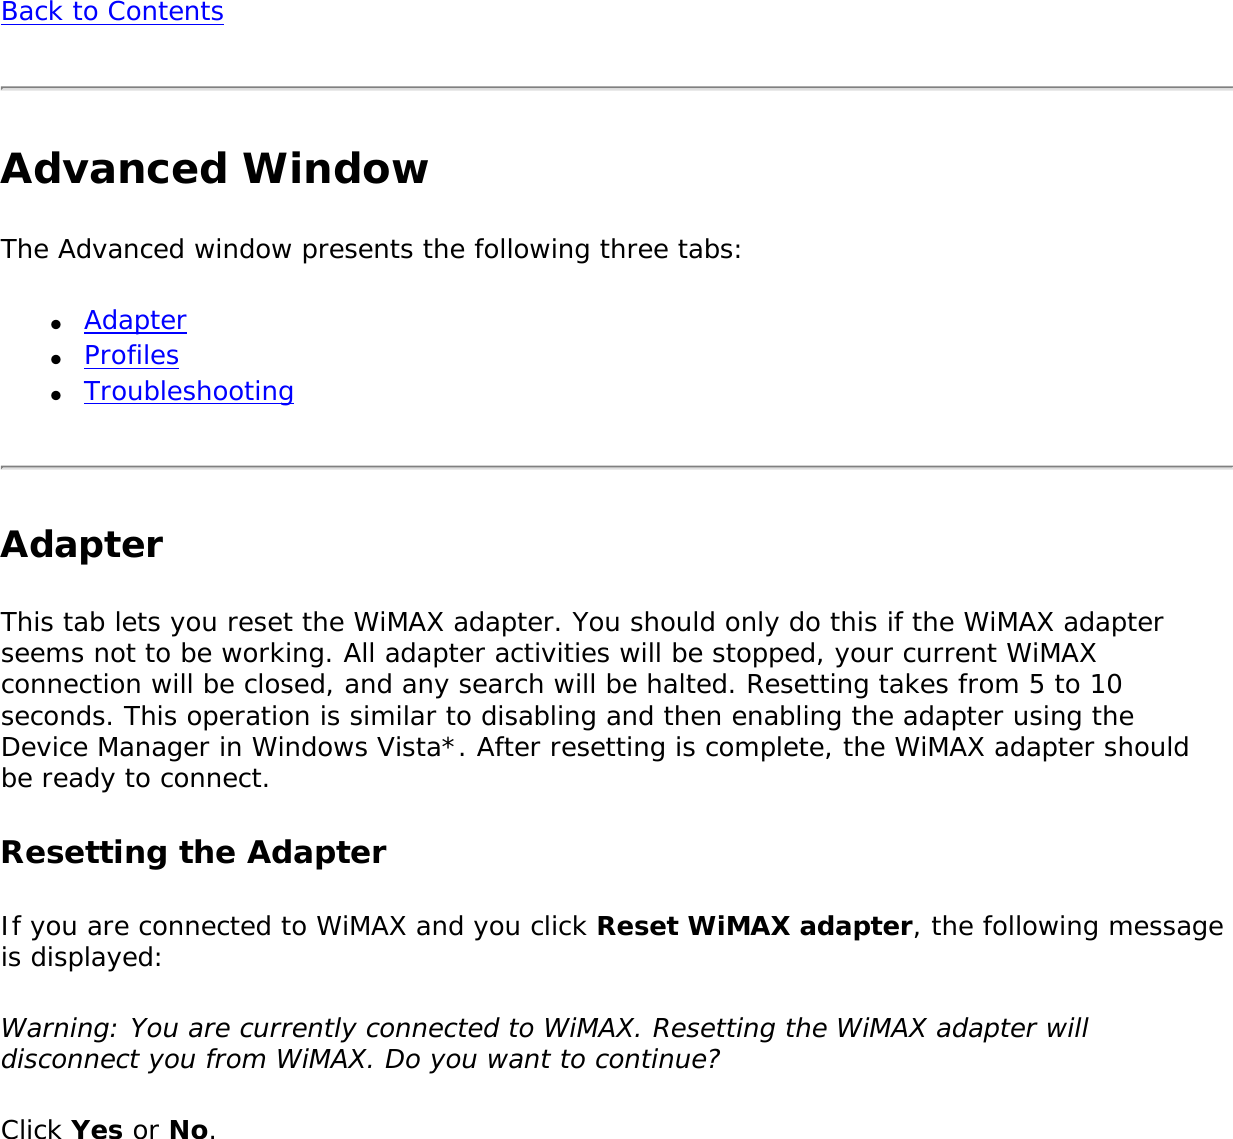 Back to ContentsAdvanced WindowThe Advanced window presents the following three tabs:●     Adapter●     Profiles●     TroubleshootingAdapter This tab lets you reset the WiMAX adapter. You should only do this if the WiMAX adapter seems not to be working. All adapter activities will be stopped, your current WiMAX connection will be closed, and any search will be halted. Resetting takes from 5 to 10 seconds. This operation is similar to disabling and then enabling the adapter using the Device Manager in Windows Vista*. After resetting is complete, the WiMAX adapter should be ready to connect. Resetting the Adapter If you are connected to WiMAX and you click Reset WiMAX adapter, the following message is displayed:Warning: You are currently connected to WiMAX. Resetting the WiMAX adapter will disconnect you from WiMAX. Do you want to continue? Click Yes or No. 